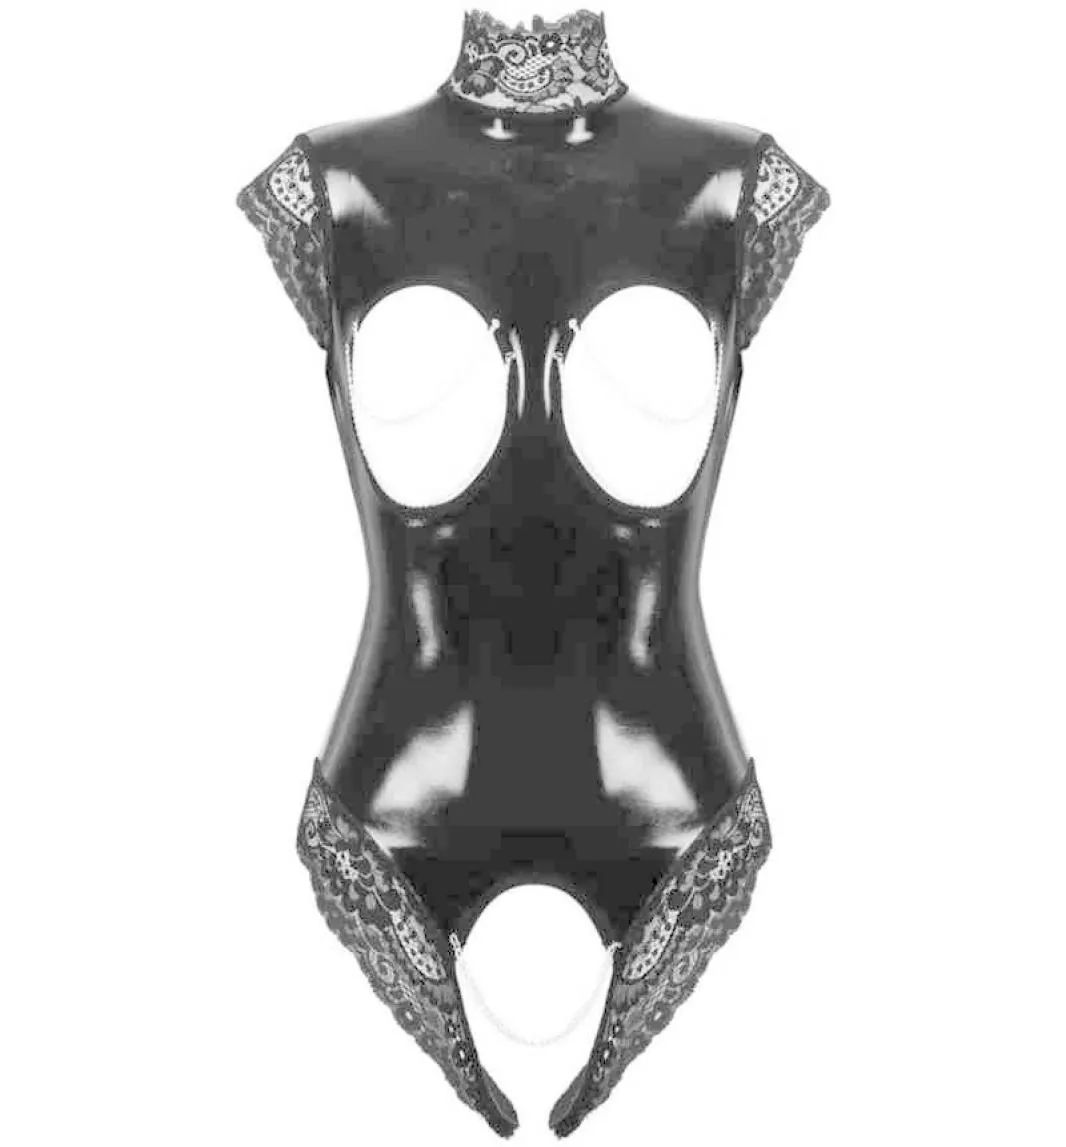 Nxy Sexy Set Erotic Fetish Body Suit Cupless Crotchless Teddy Lingerie Femme Black Lawbook Pvc Latex Catsuit Gothic Women Porn Cos1239670